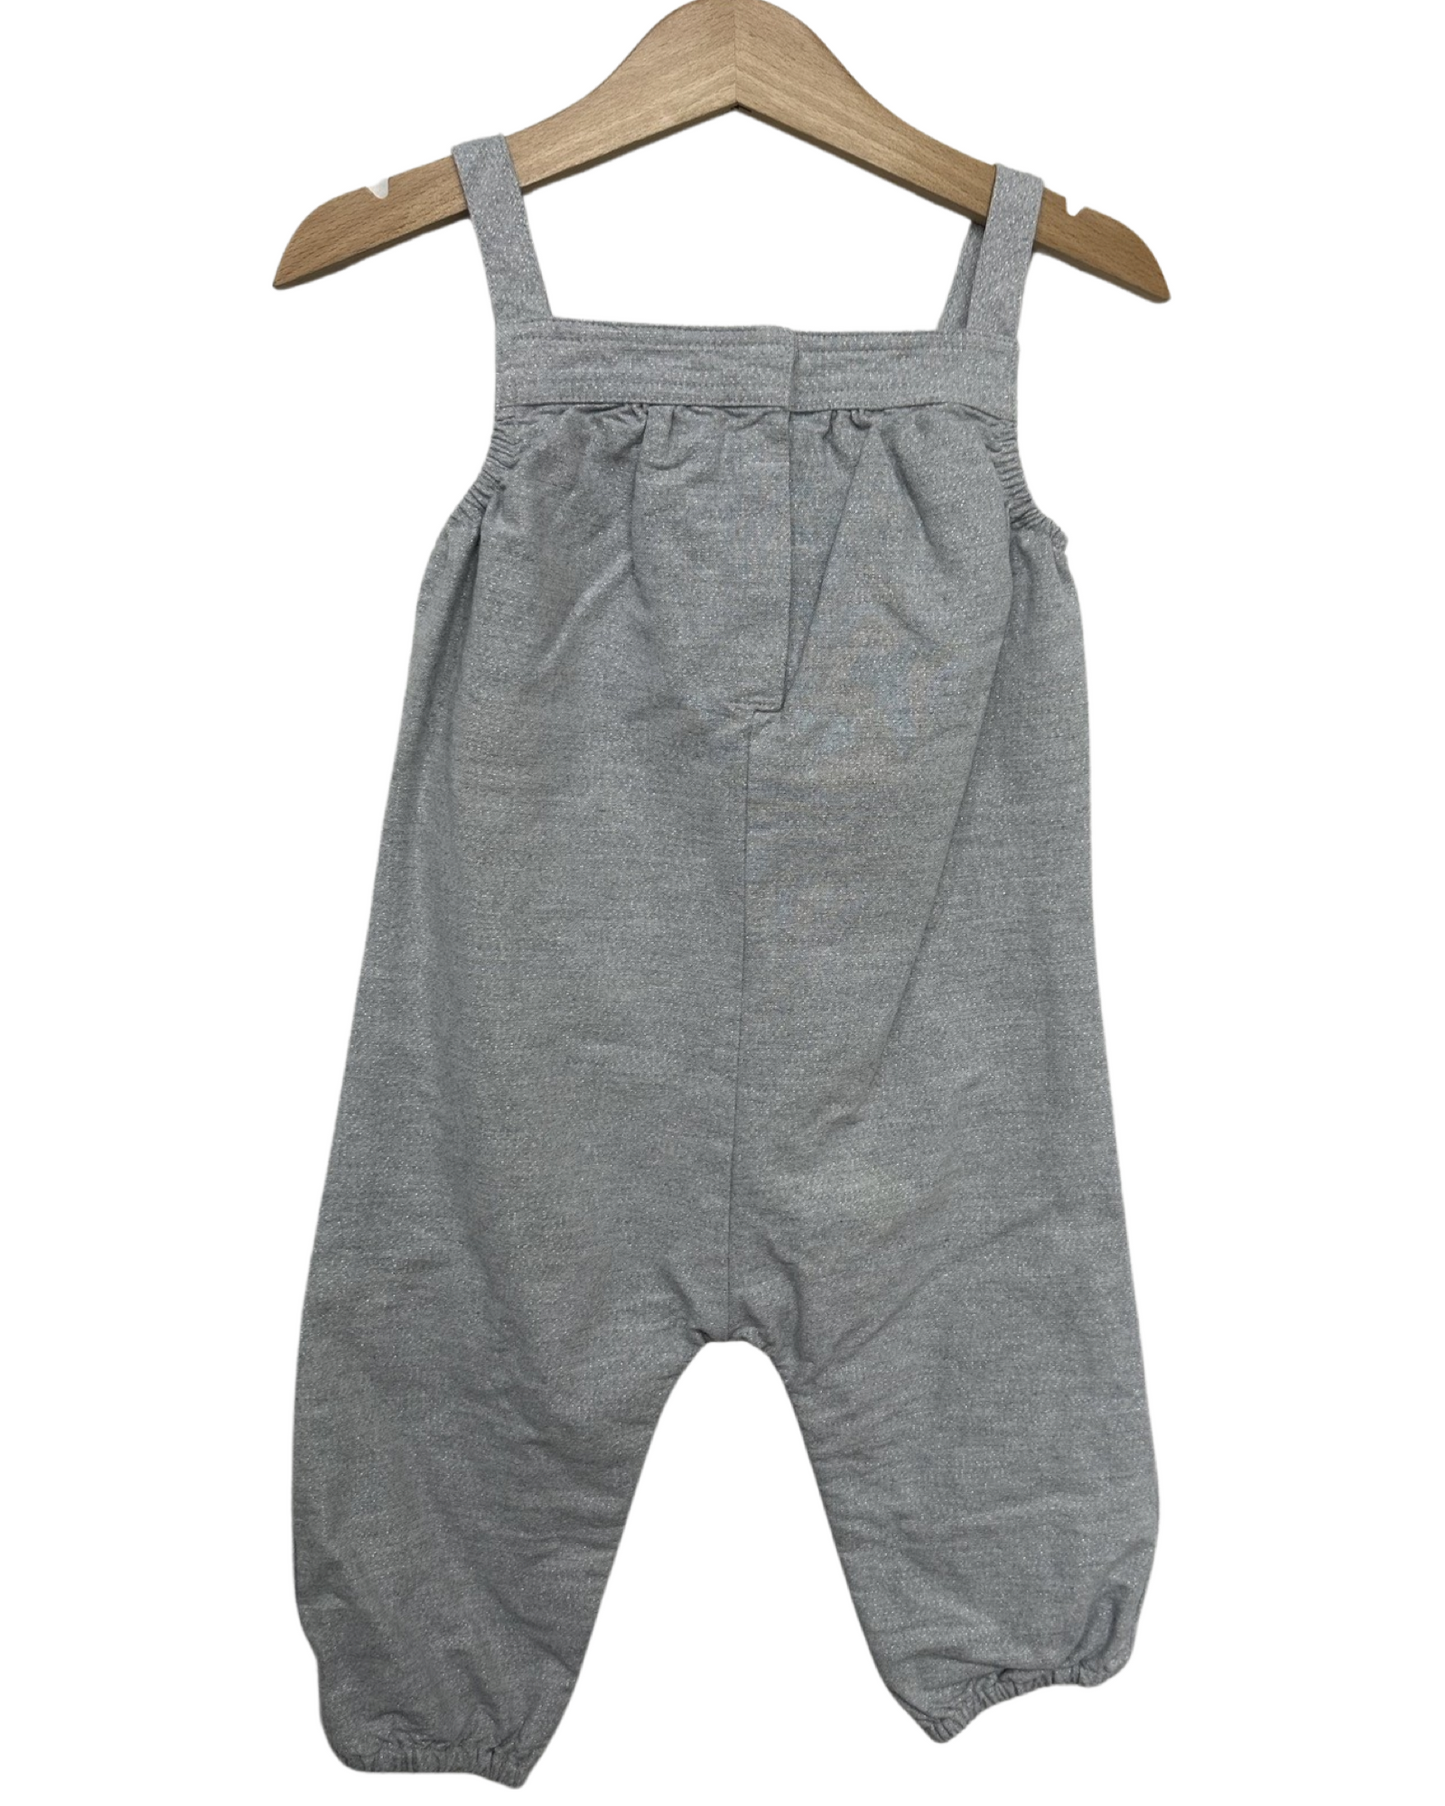 The Little White Company silver romper (size 18-24mths)